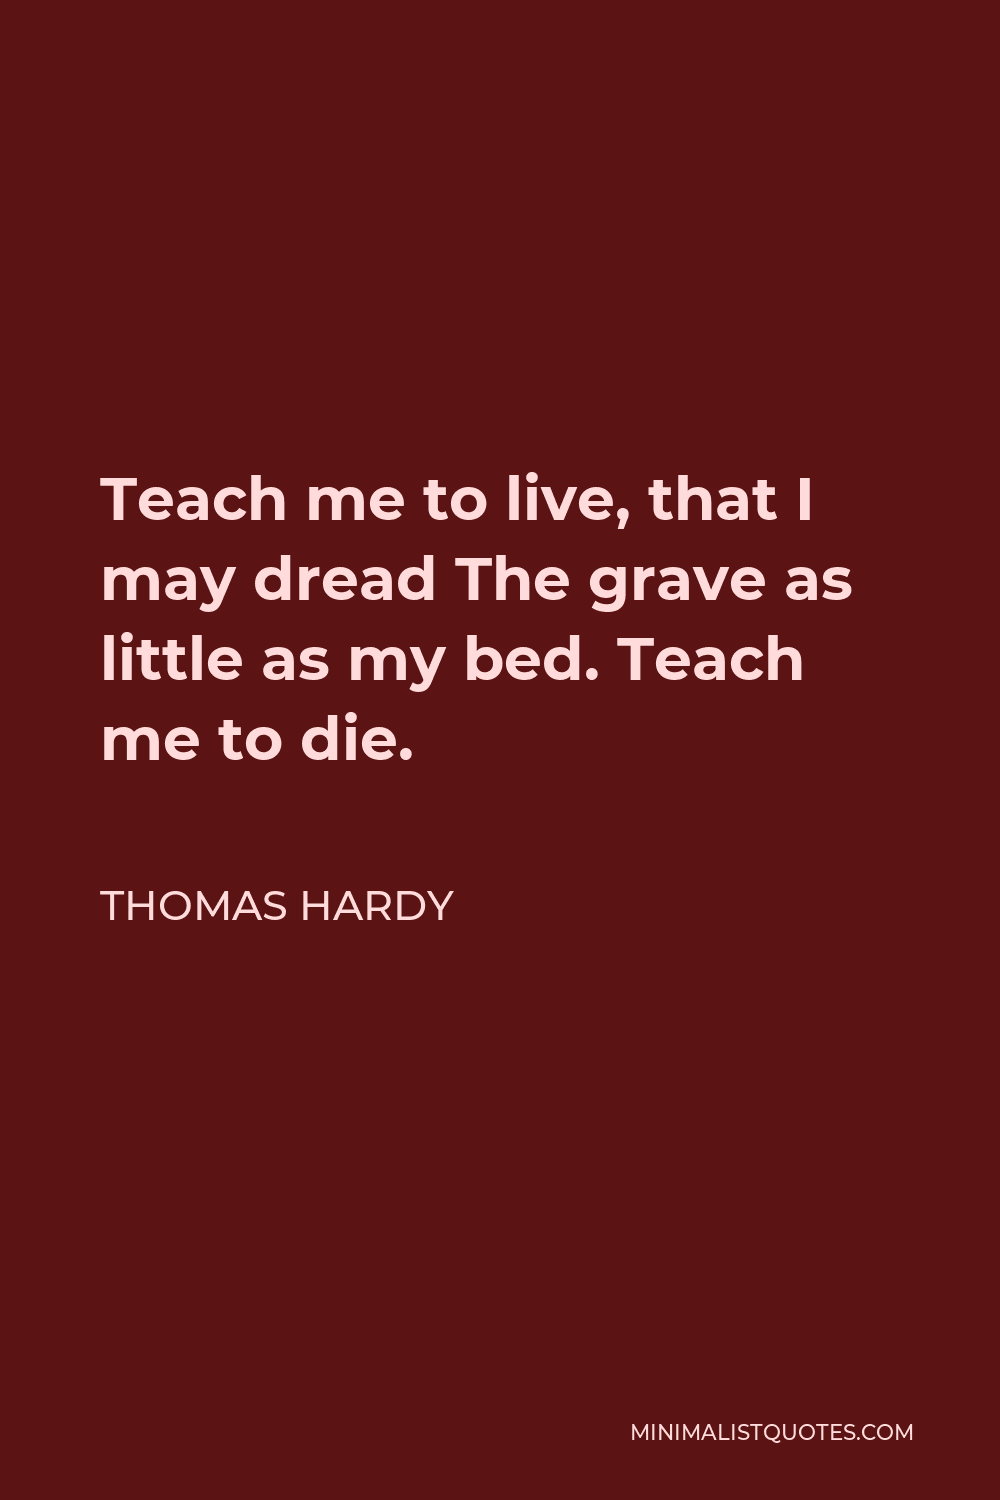 Thomas Hardy Quote - Teach me to live, that I may dread The grave as little as my bed. Teach me to die.